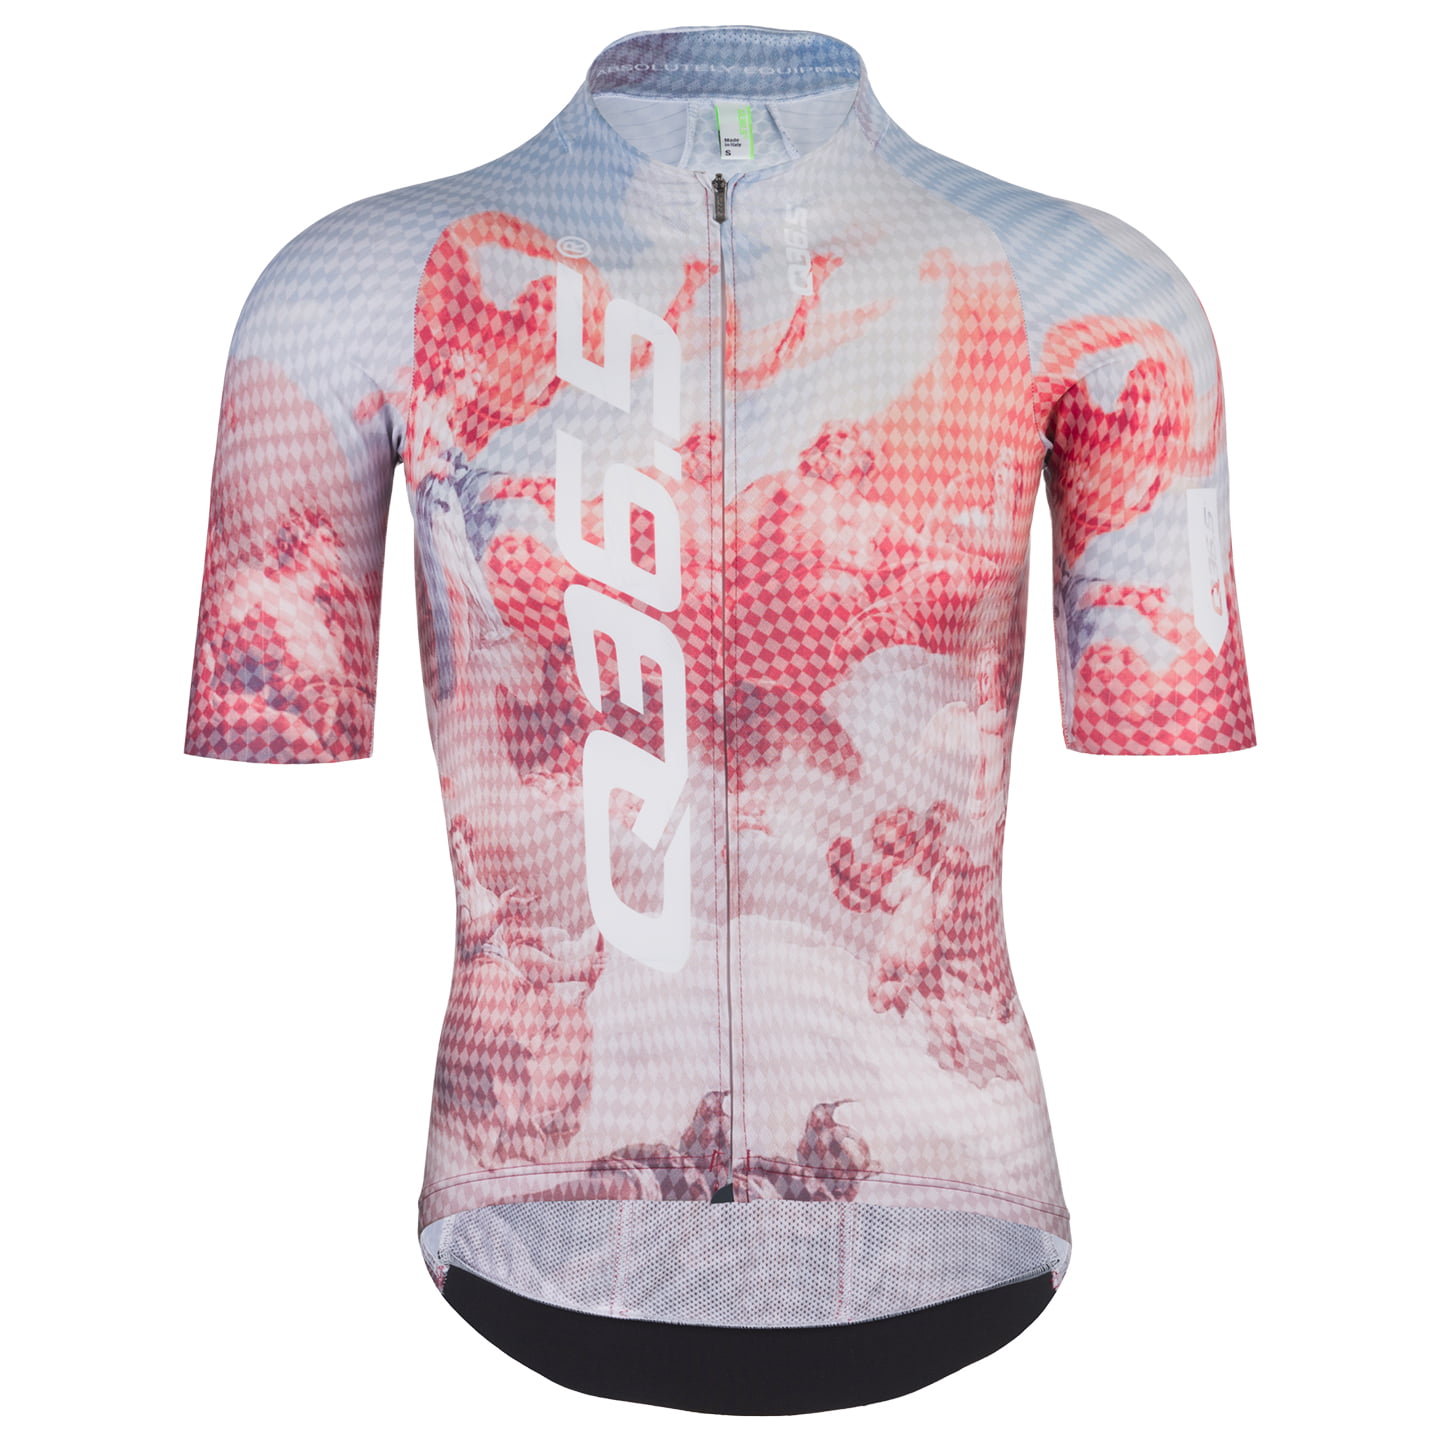 Q36.5 R2 Fresco Short Sleeve Jersey, for men, size S, Cycling jersey, Cycling clothing